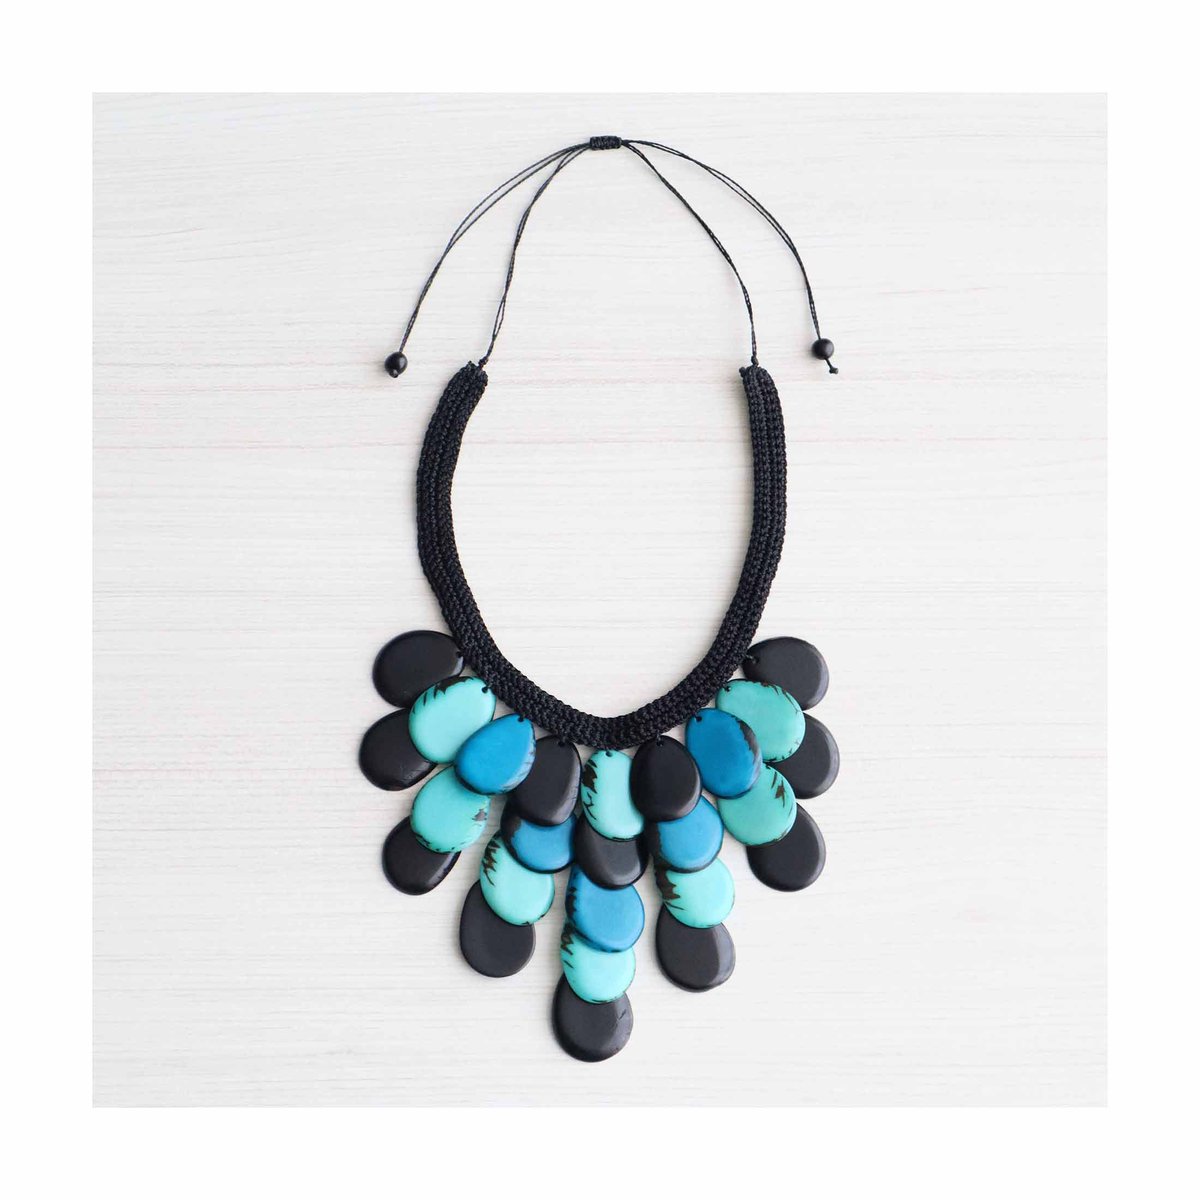 NOW IN OUR POPSFL #etsy shop: Tagua necklace organic tagua jewelry multi colors - blue turquoise and black etsy.me/3eycdwg #taguanecklace #beadednecklaces #taguajewelry #organicjewelry #econecklaces #handmadenecklaces #taguanutnecklaces